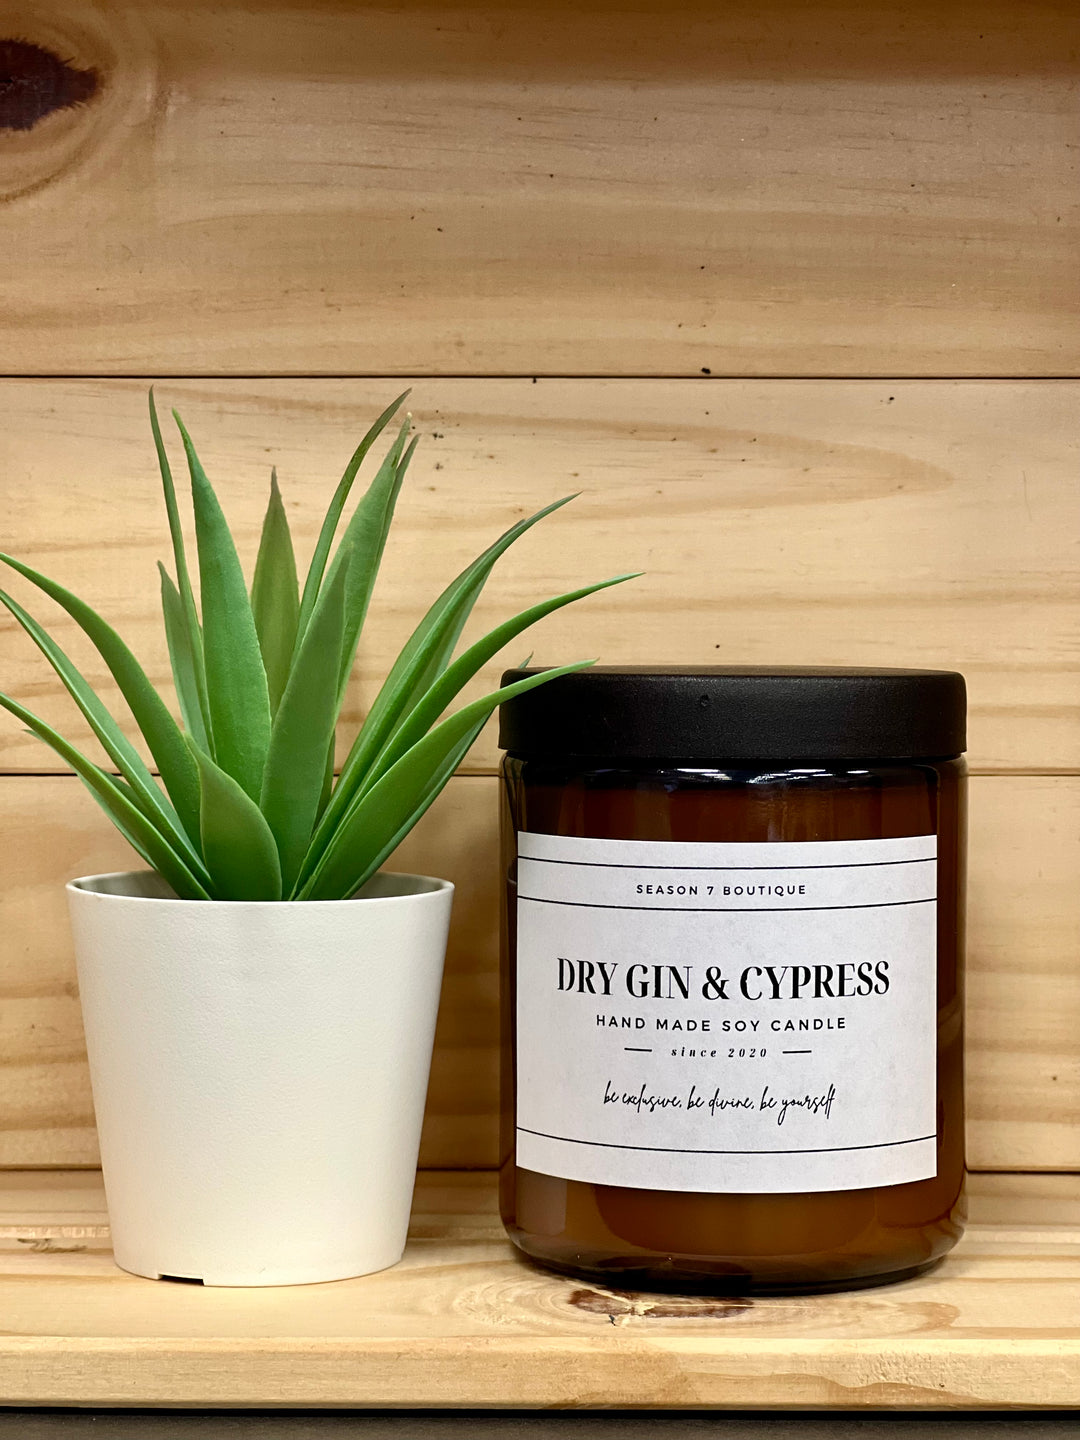 8oz Jar Hand Poured Soy Wax Candle, Dry Gin & Cypress